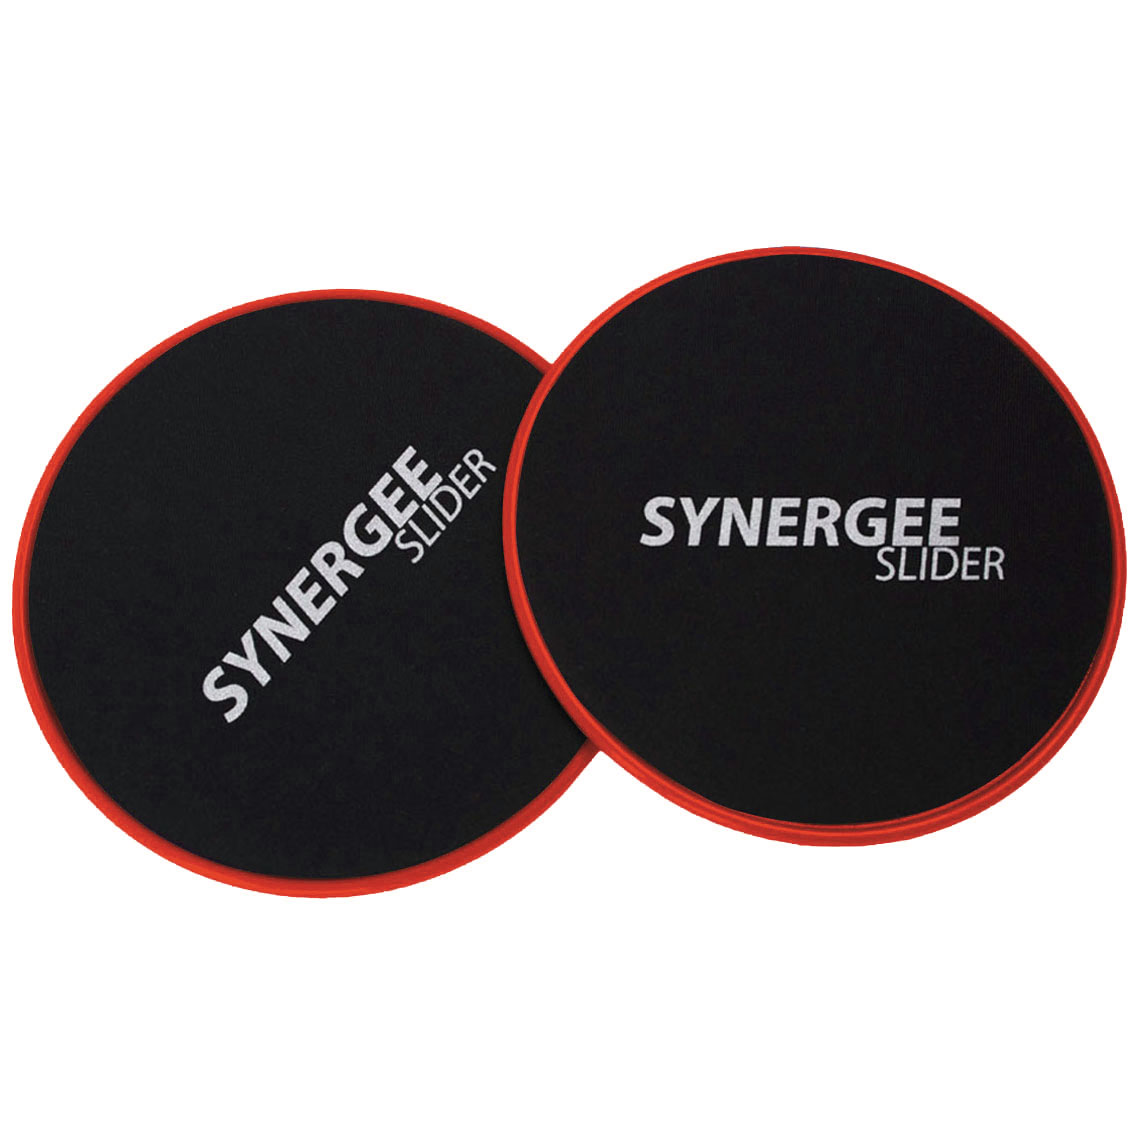 https://synergee.ca/wp-content/uploads/2017/08/Gliding-Disc-Red-Image-2.jpg